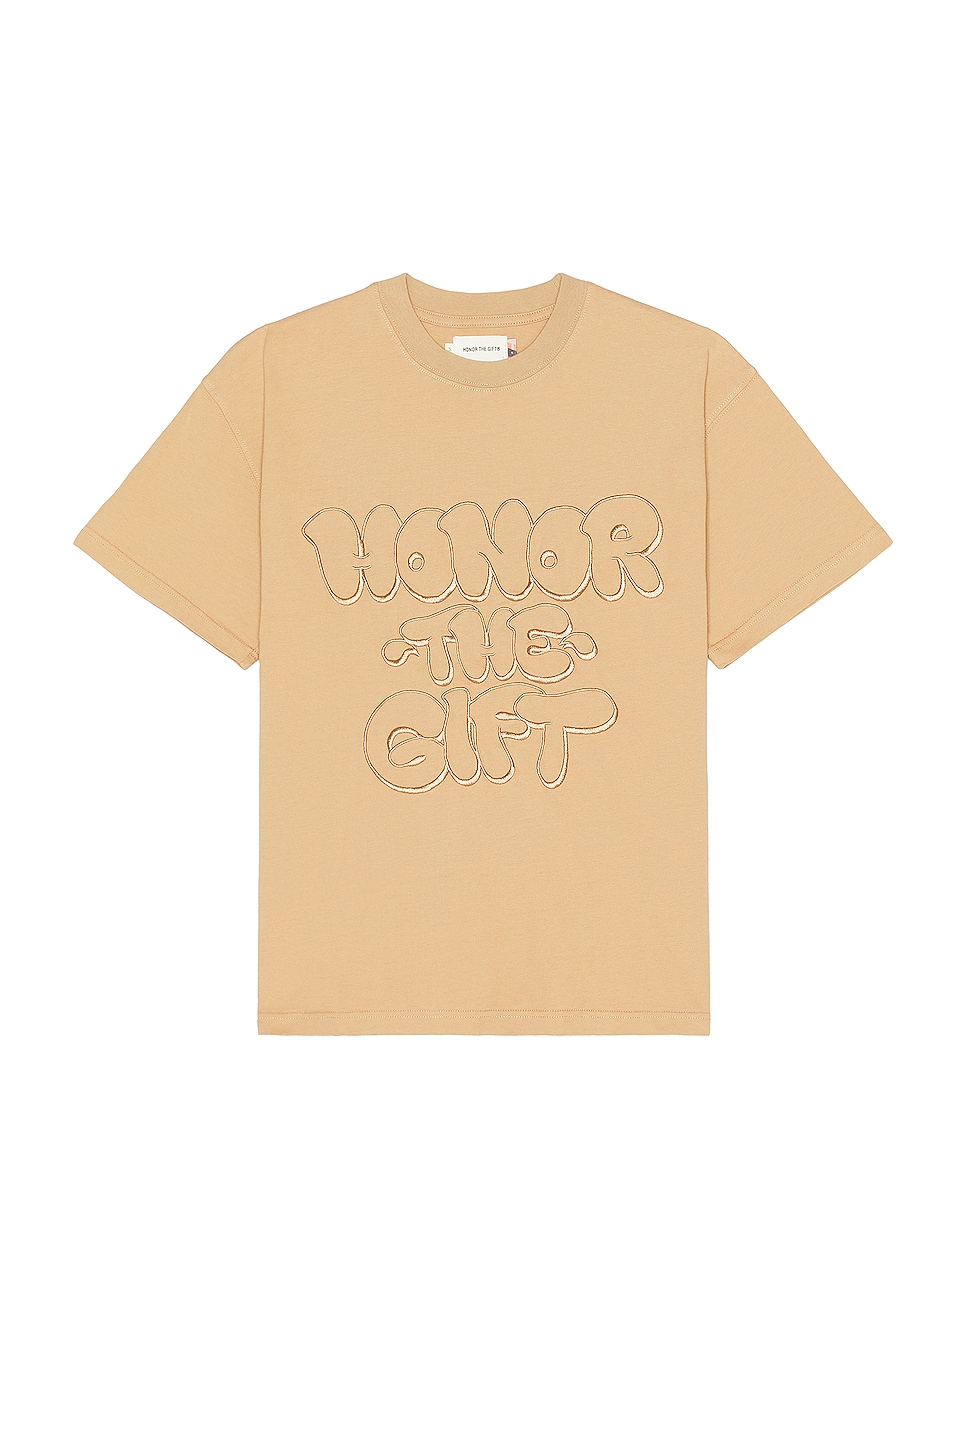 Amp'd Up Tee in Brown